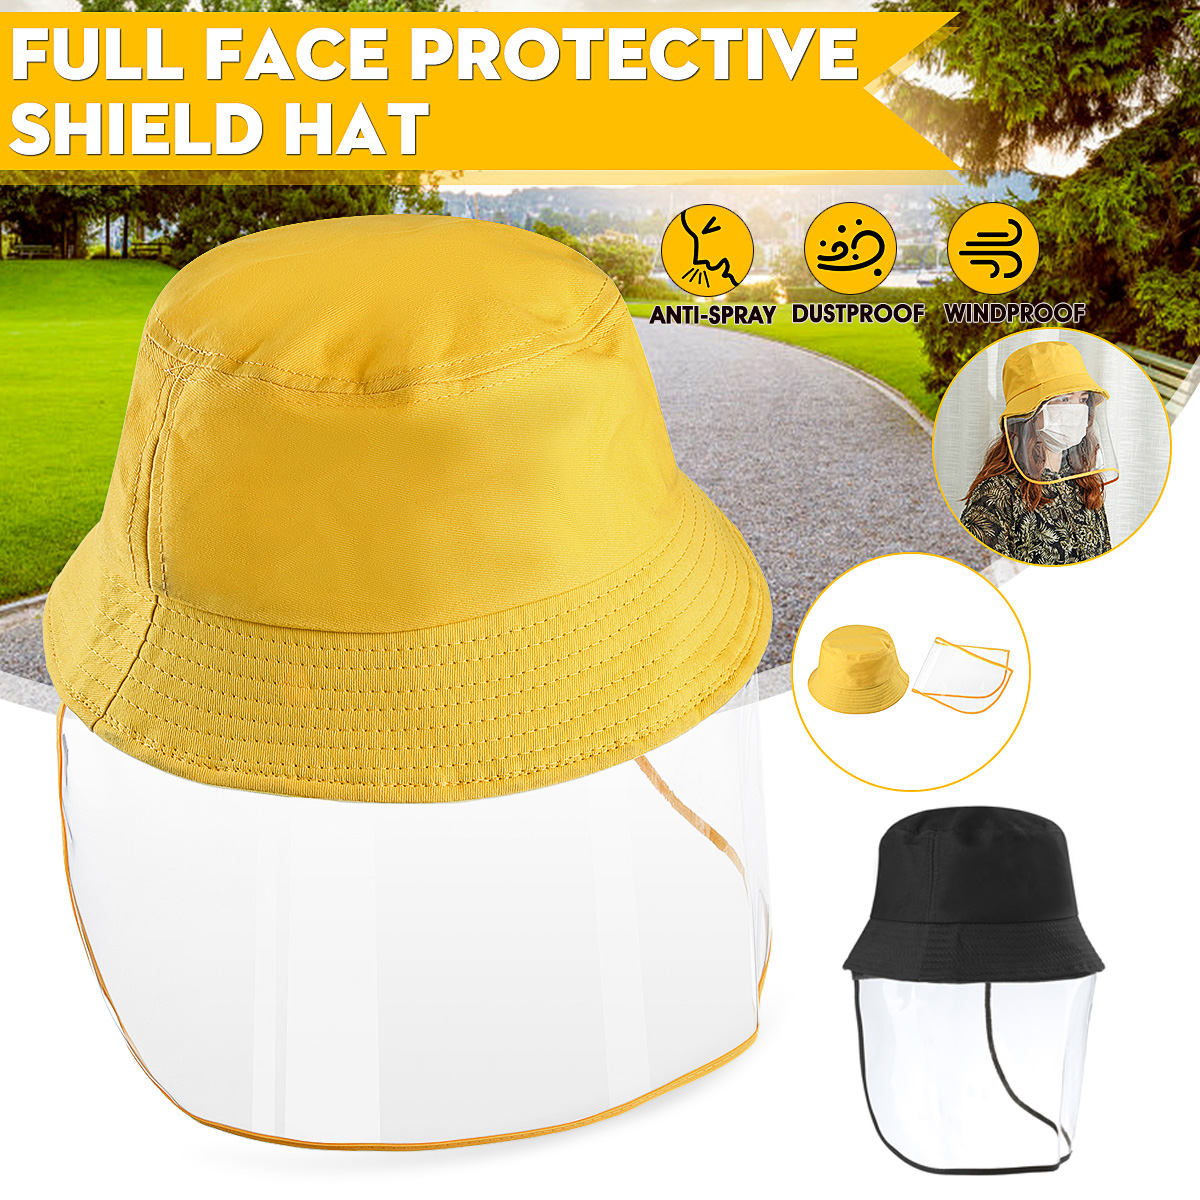 Outdoor-Transparent-Full-Face-Shied-Hat-Protective-Bucket-Hat-Removable-Anti-spittle-Dustproof-Face--1673857-1